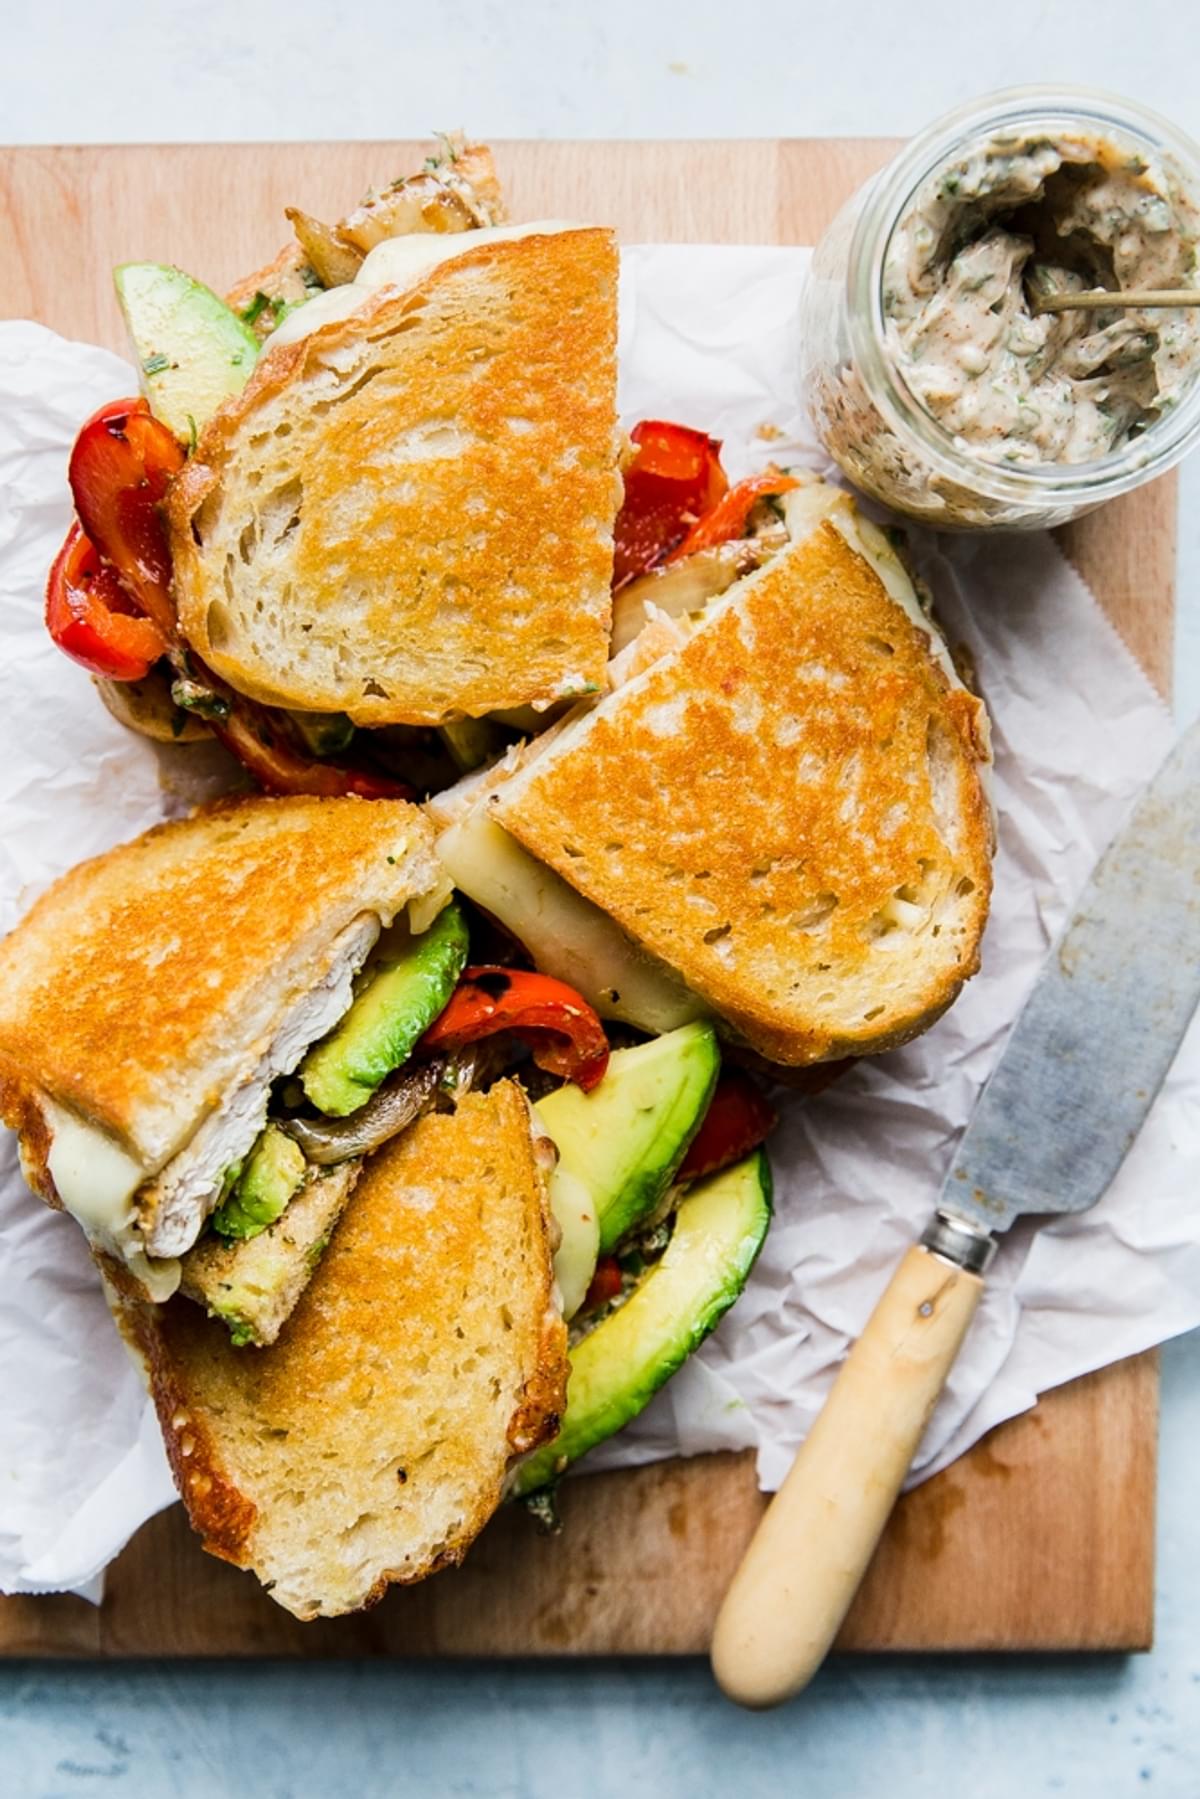 two grilled chicken sandwiches shown cut in half with avocado, grilled peppers and grilled chicken showing.